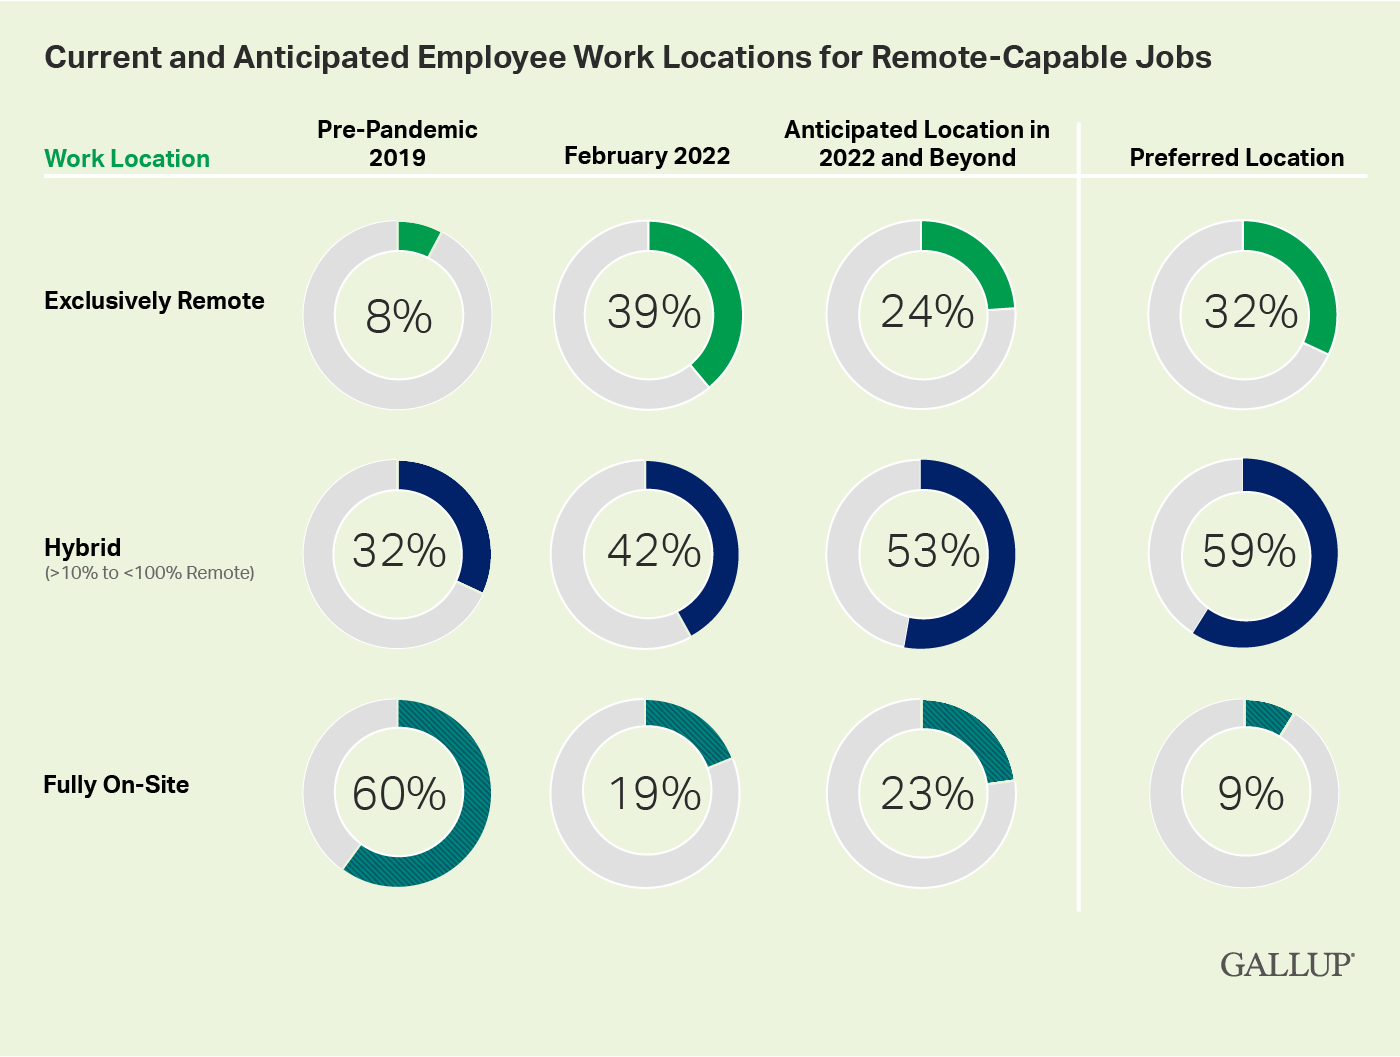 Current and Anticipated Employee Work Location for Remote-Capable Jobs. 59% prefer hybrid work arrangements going forward.